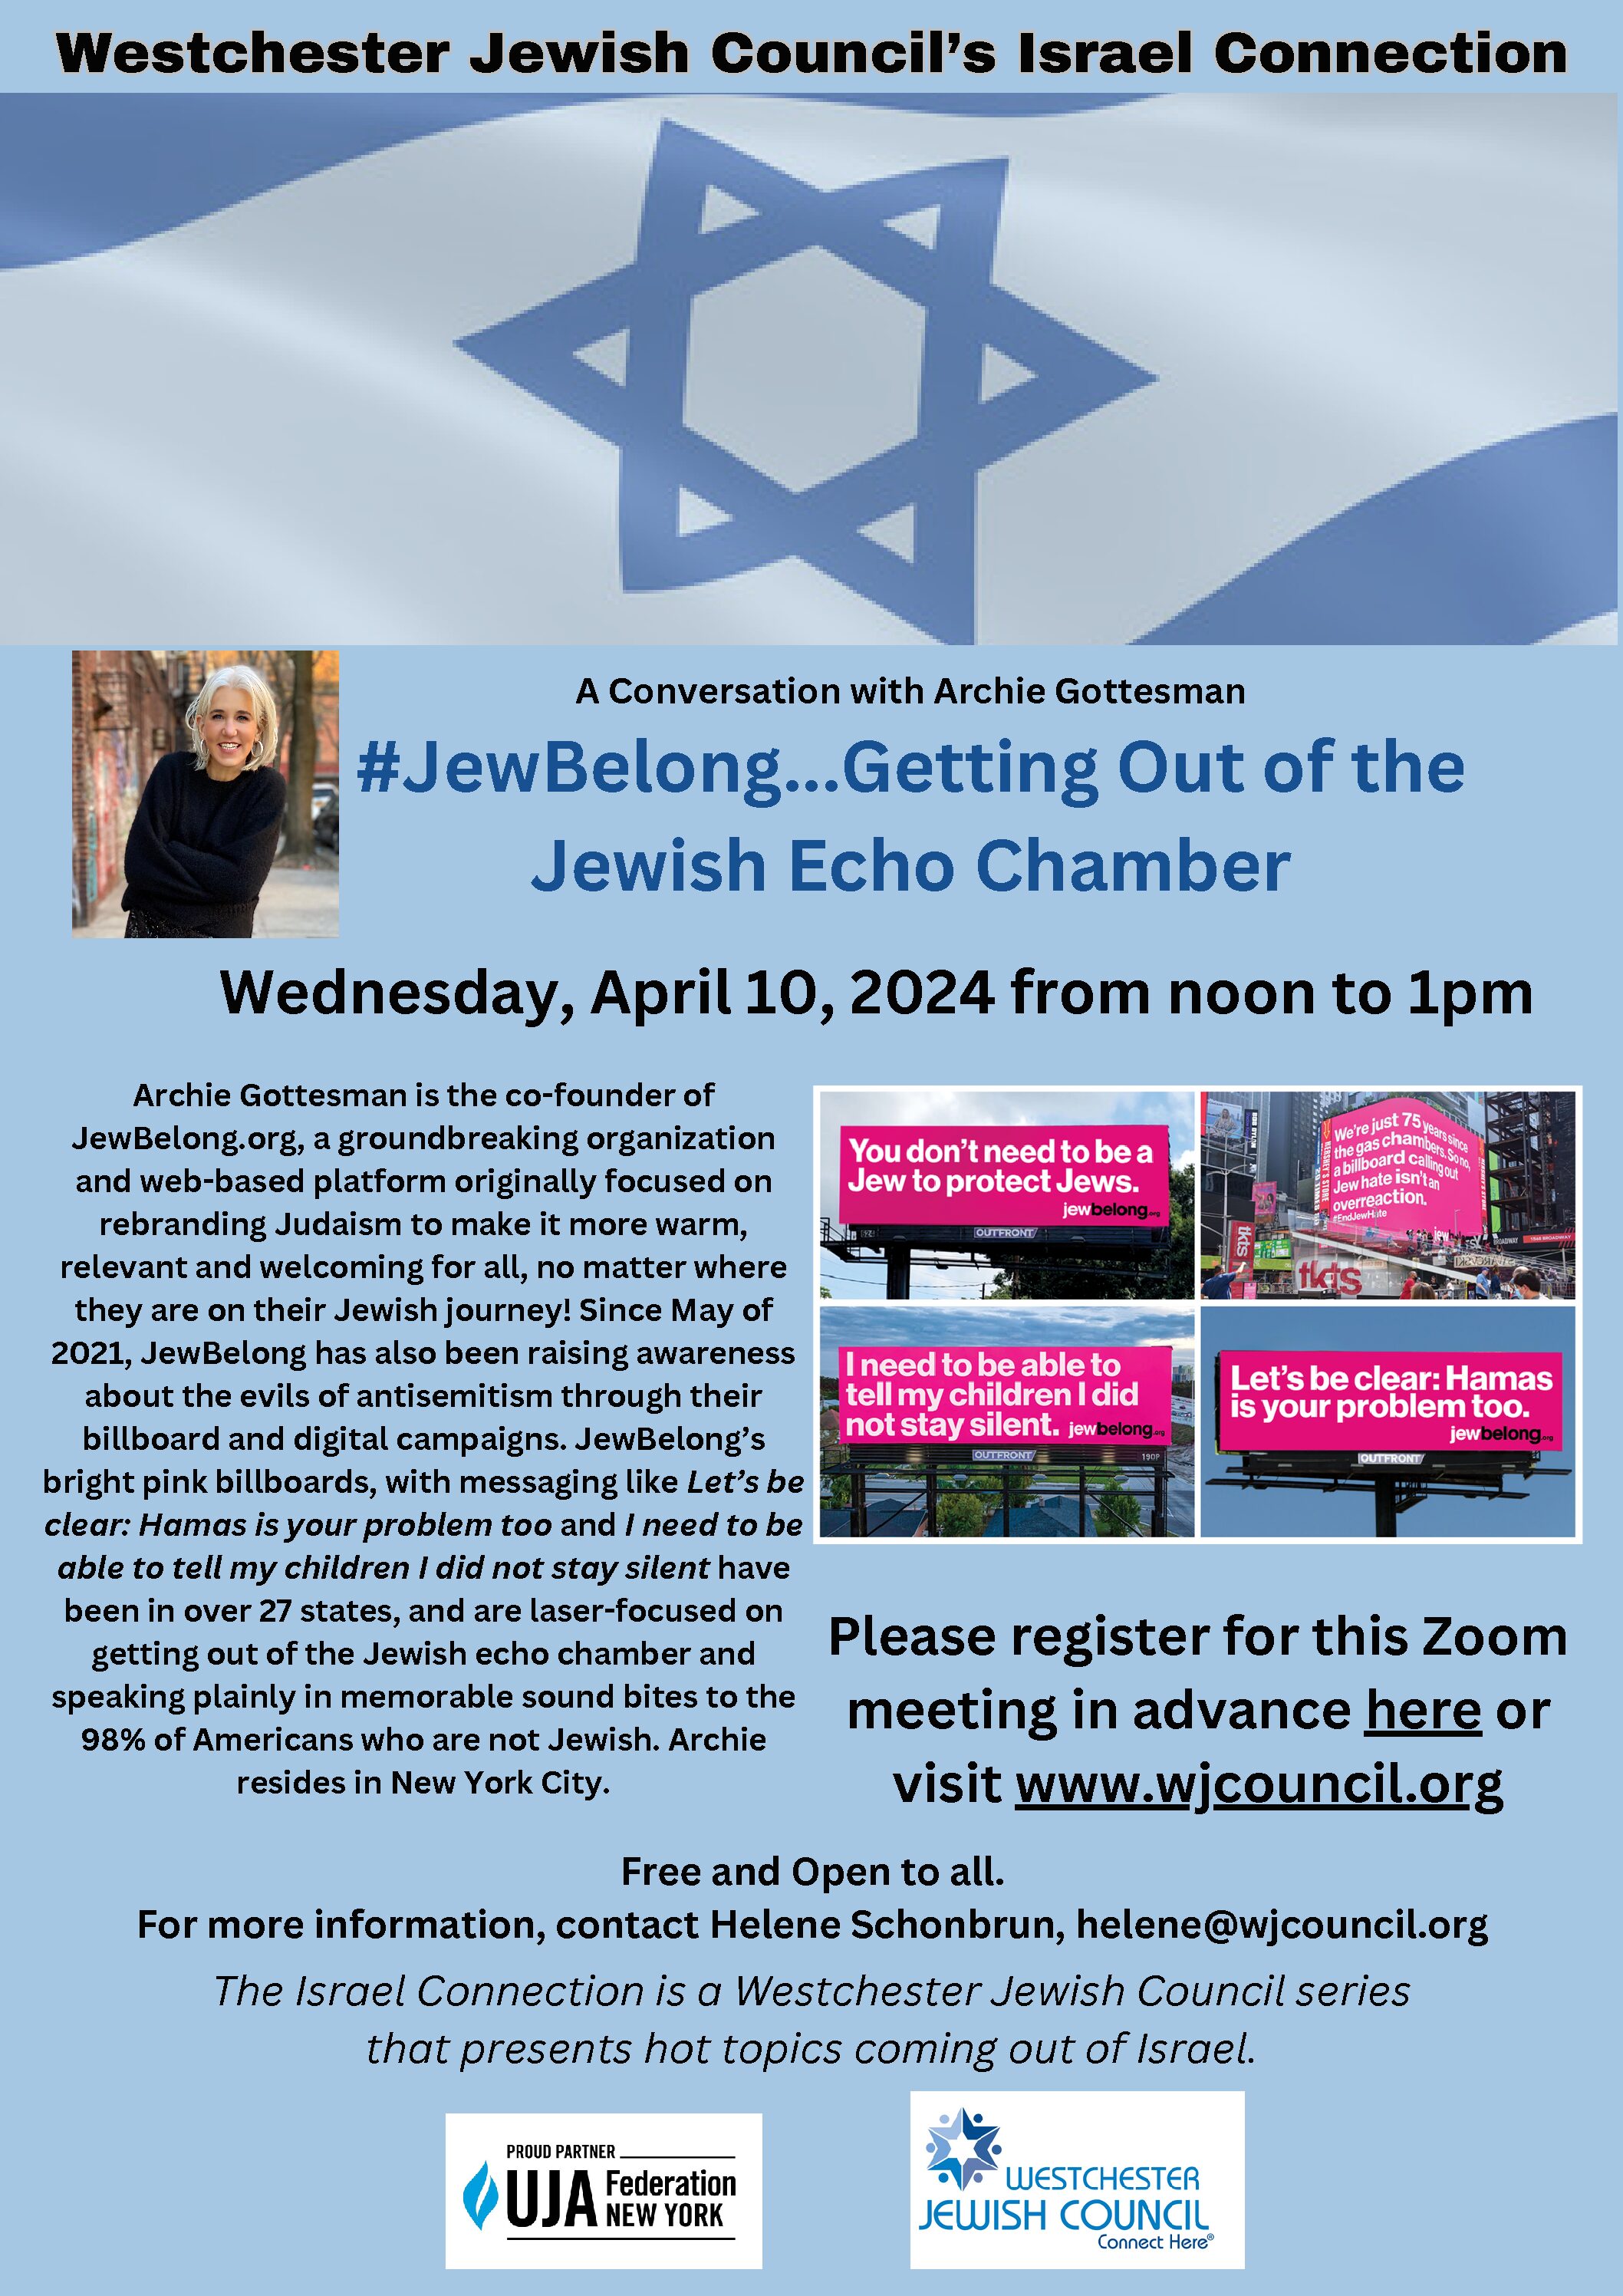 Westchester Jewish Council Israel Connection - #Jew Belong...Getting out of the Jewish Echo Chamber